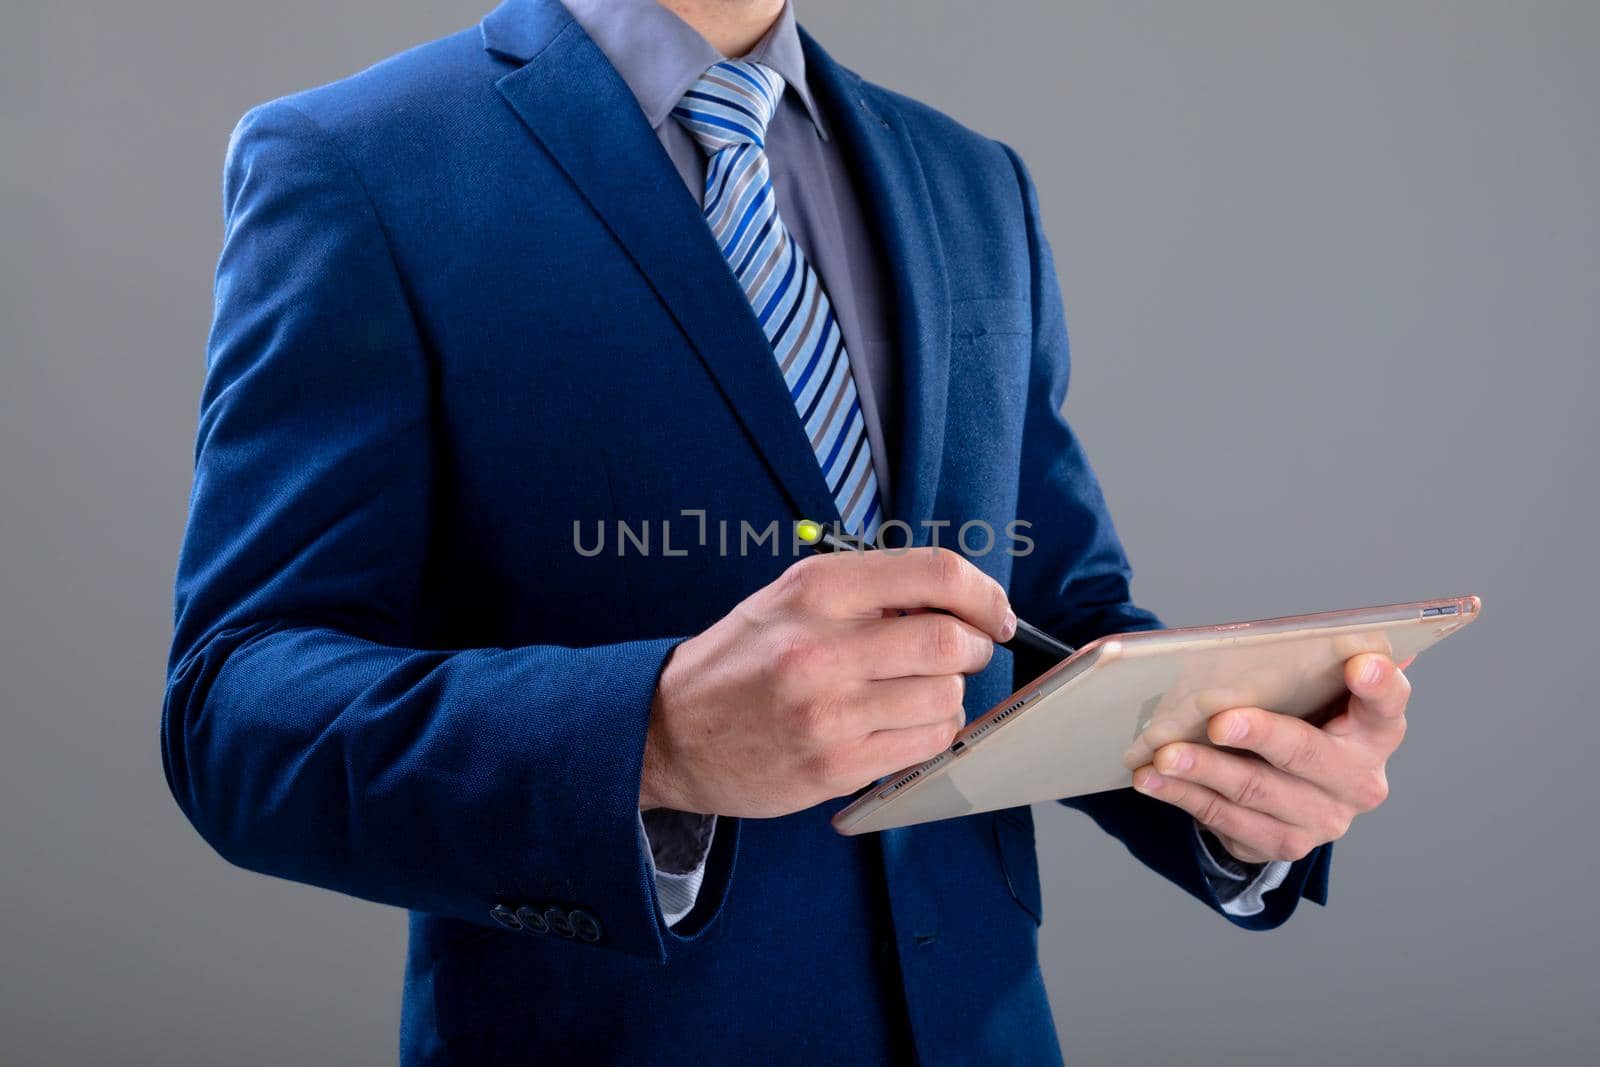 Midsection of caucasian businessman using tablet, isolated on grey background. business technology, communication and growth concept.